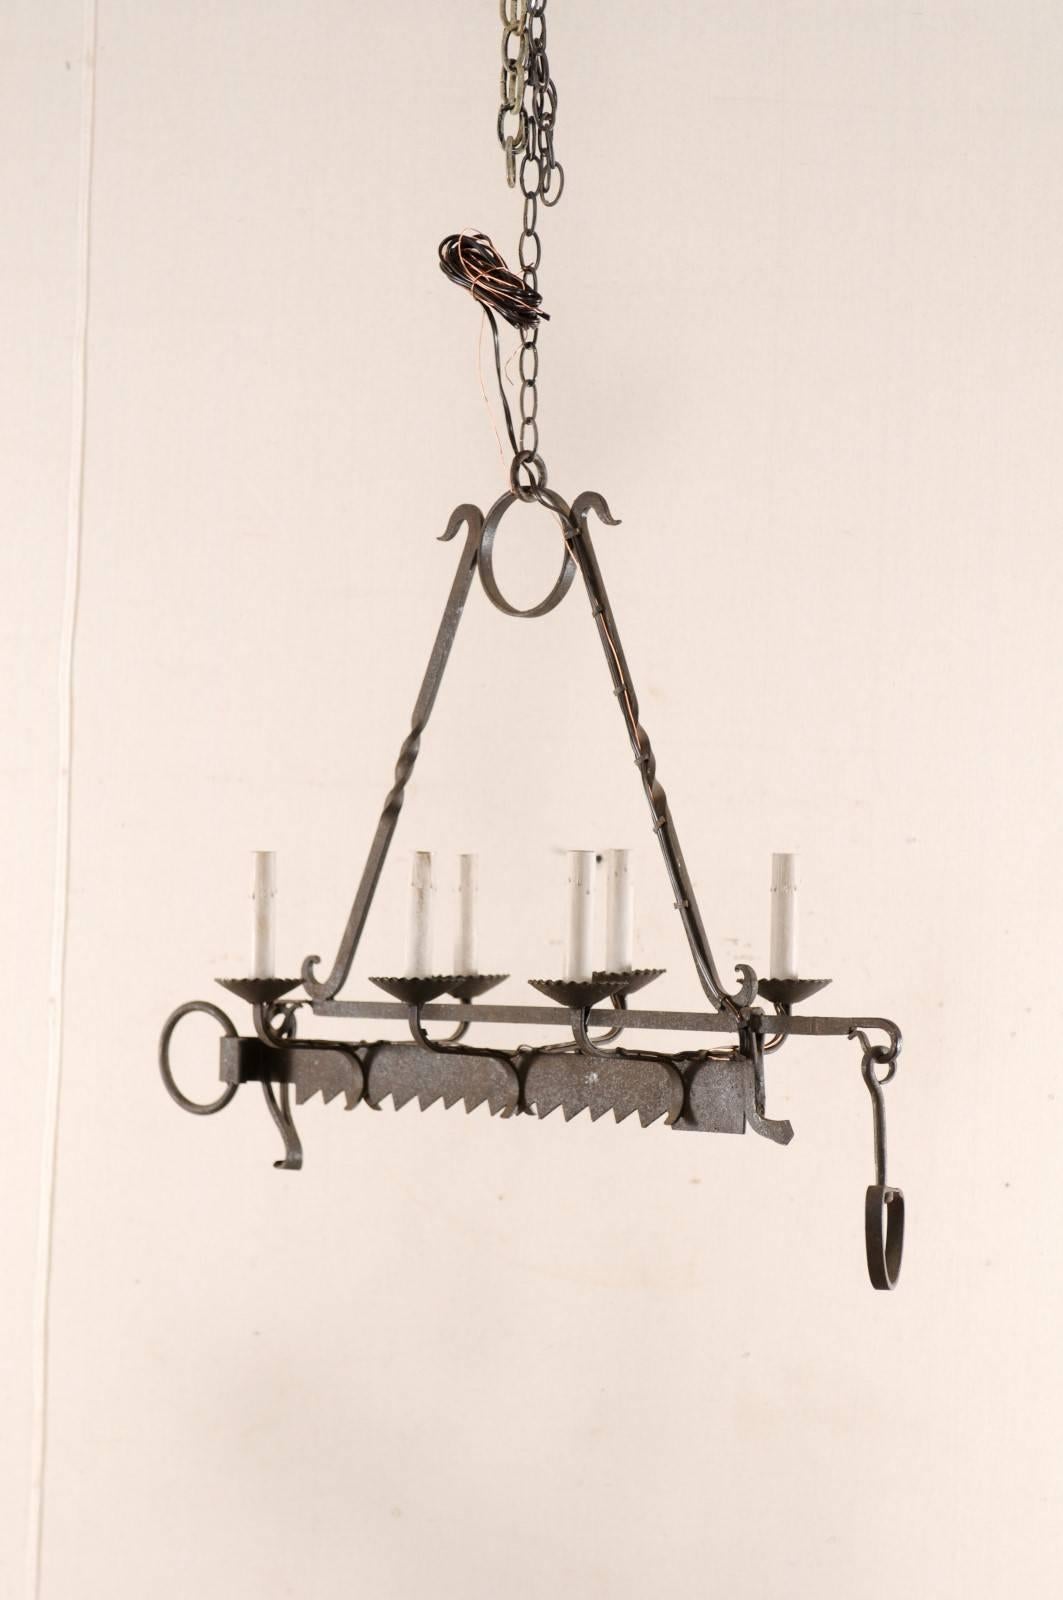 A French mid-century, six-light forged-iron chandelier made from a 19th century spit-jack. A spit-jack is a type of rotisserie that was once common in fireplaces. This chandelier has six arms, three rising up along each side, which connect to the